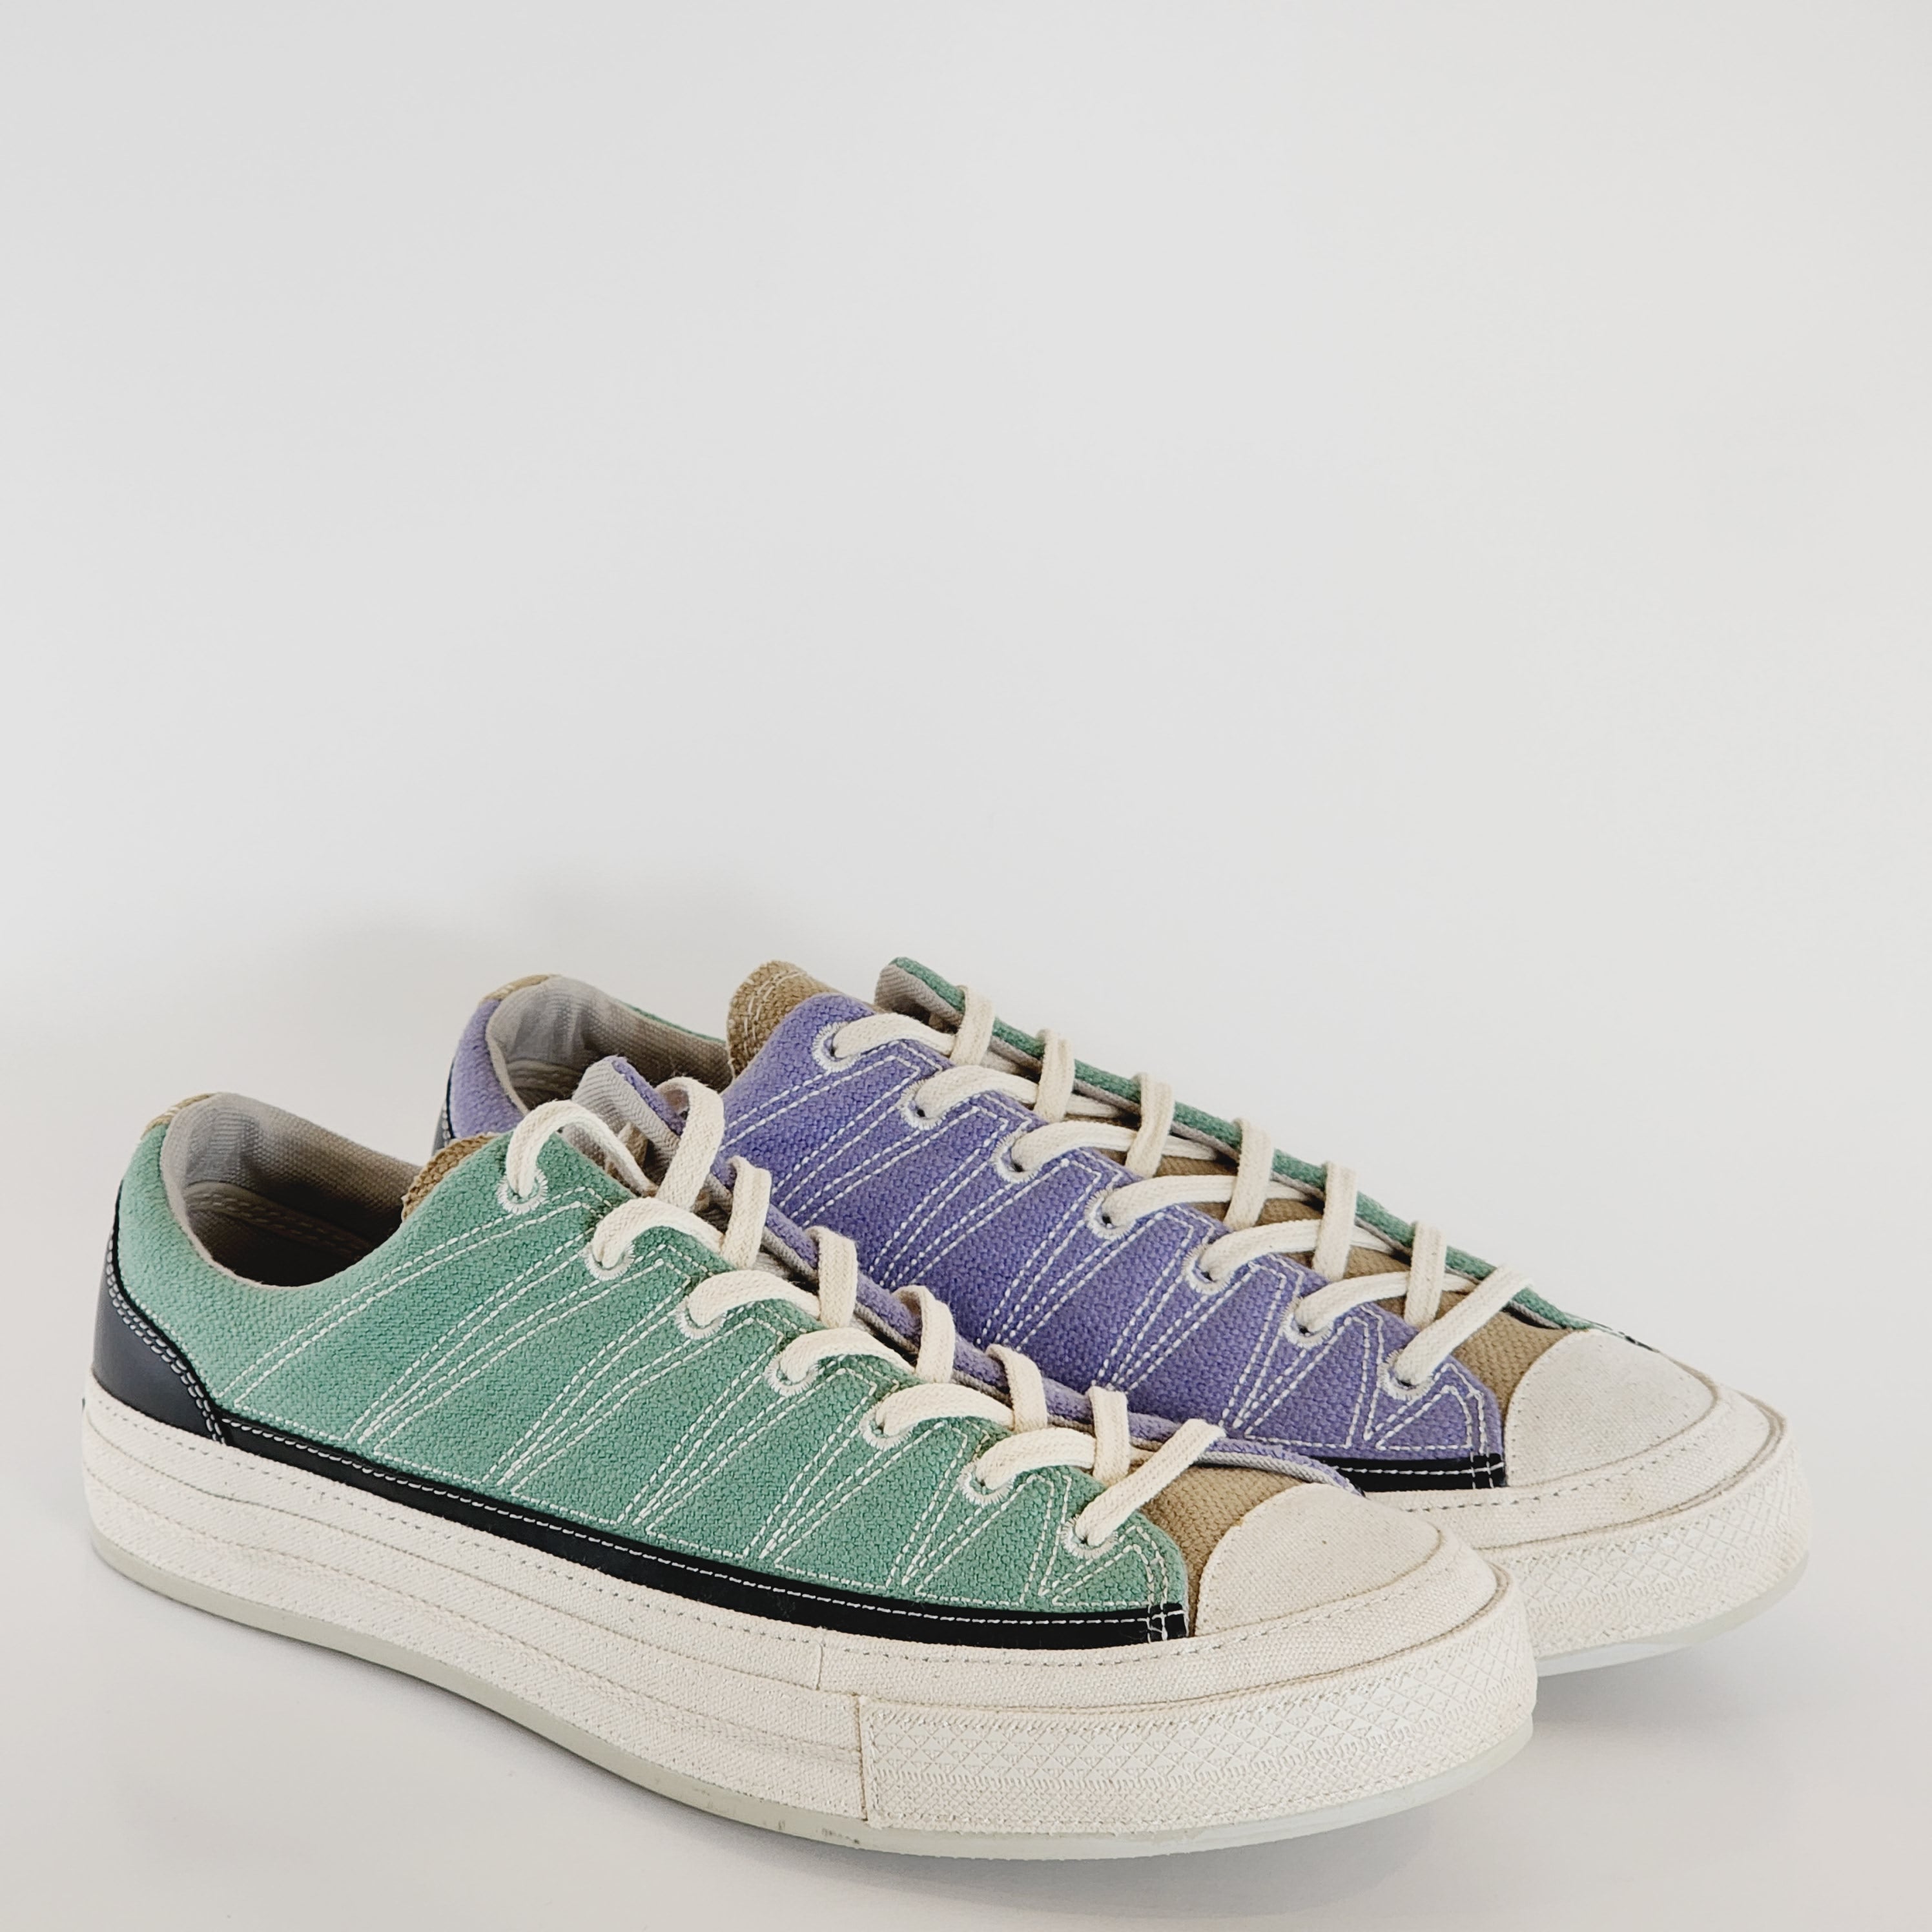 Converse Chuck 70 Low Ox Cozy Granola Cool Sage/Slate Lilac Sneakers 171549C NWT